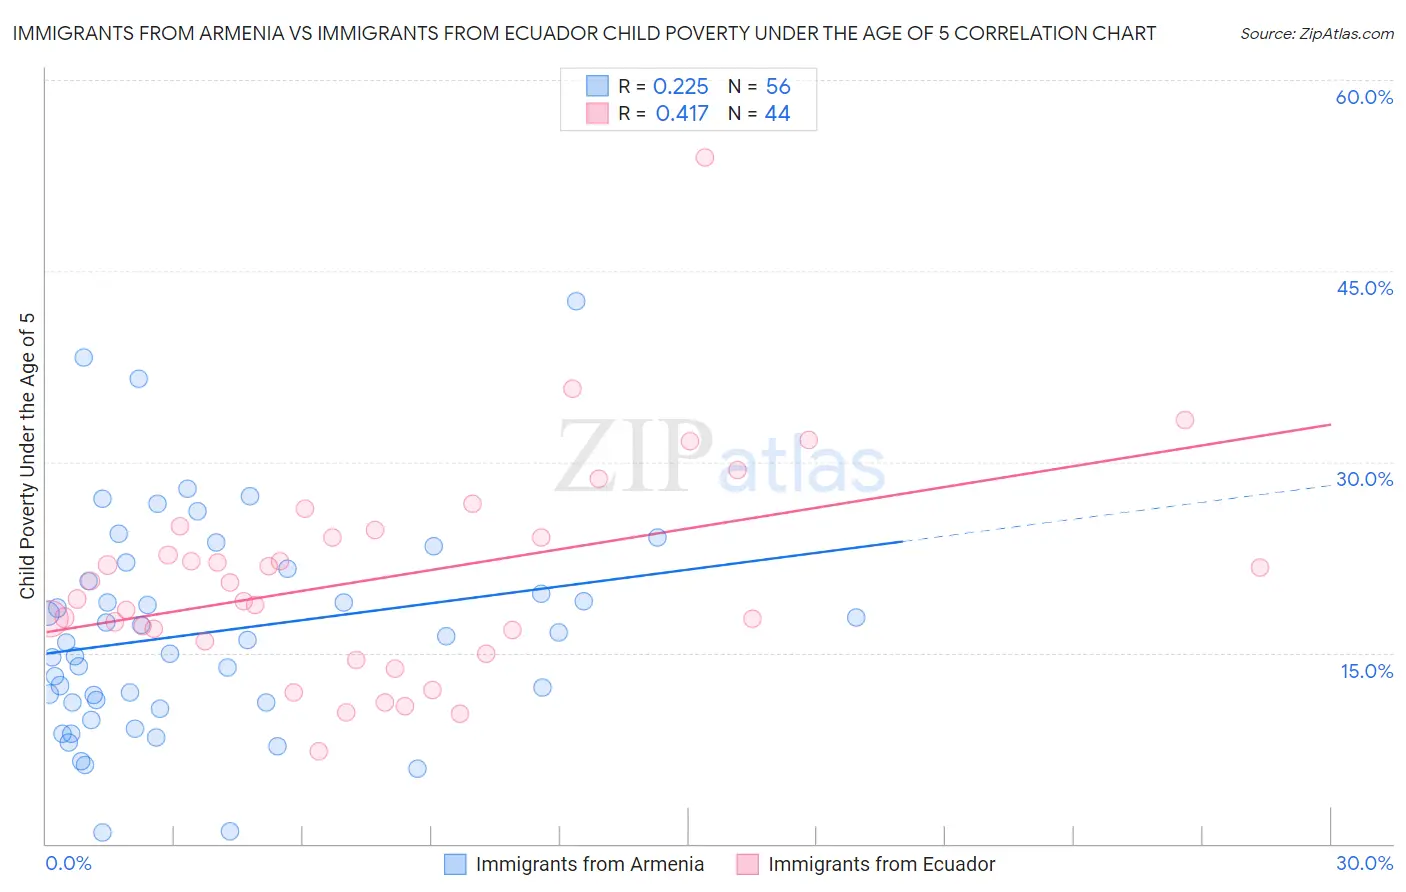 Immigrants from Armenia vs Immigrants from Ecuador Child Poverty Under the Age of 5